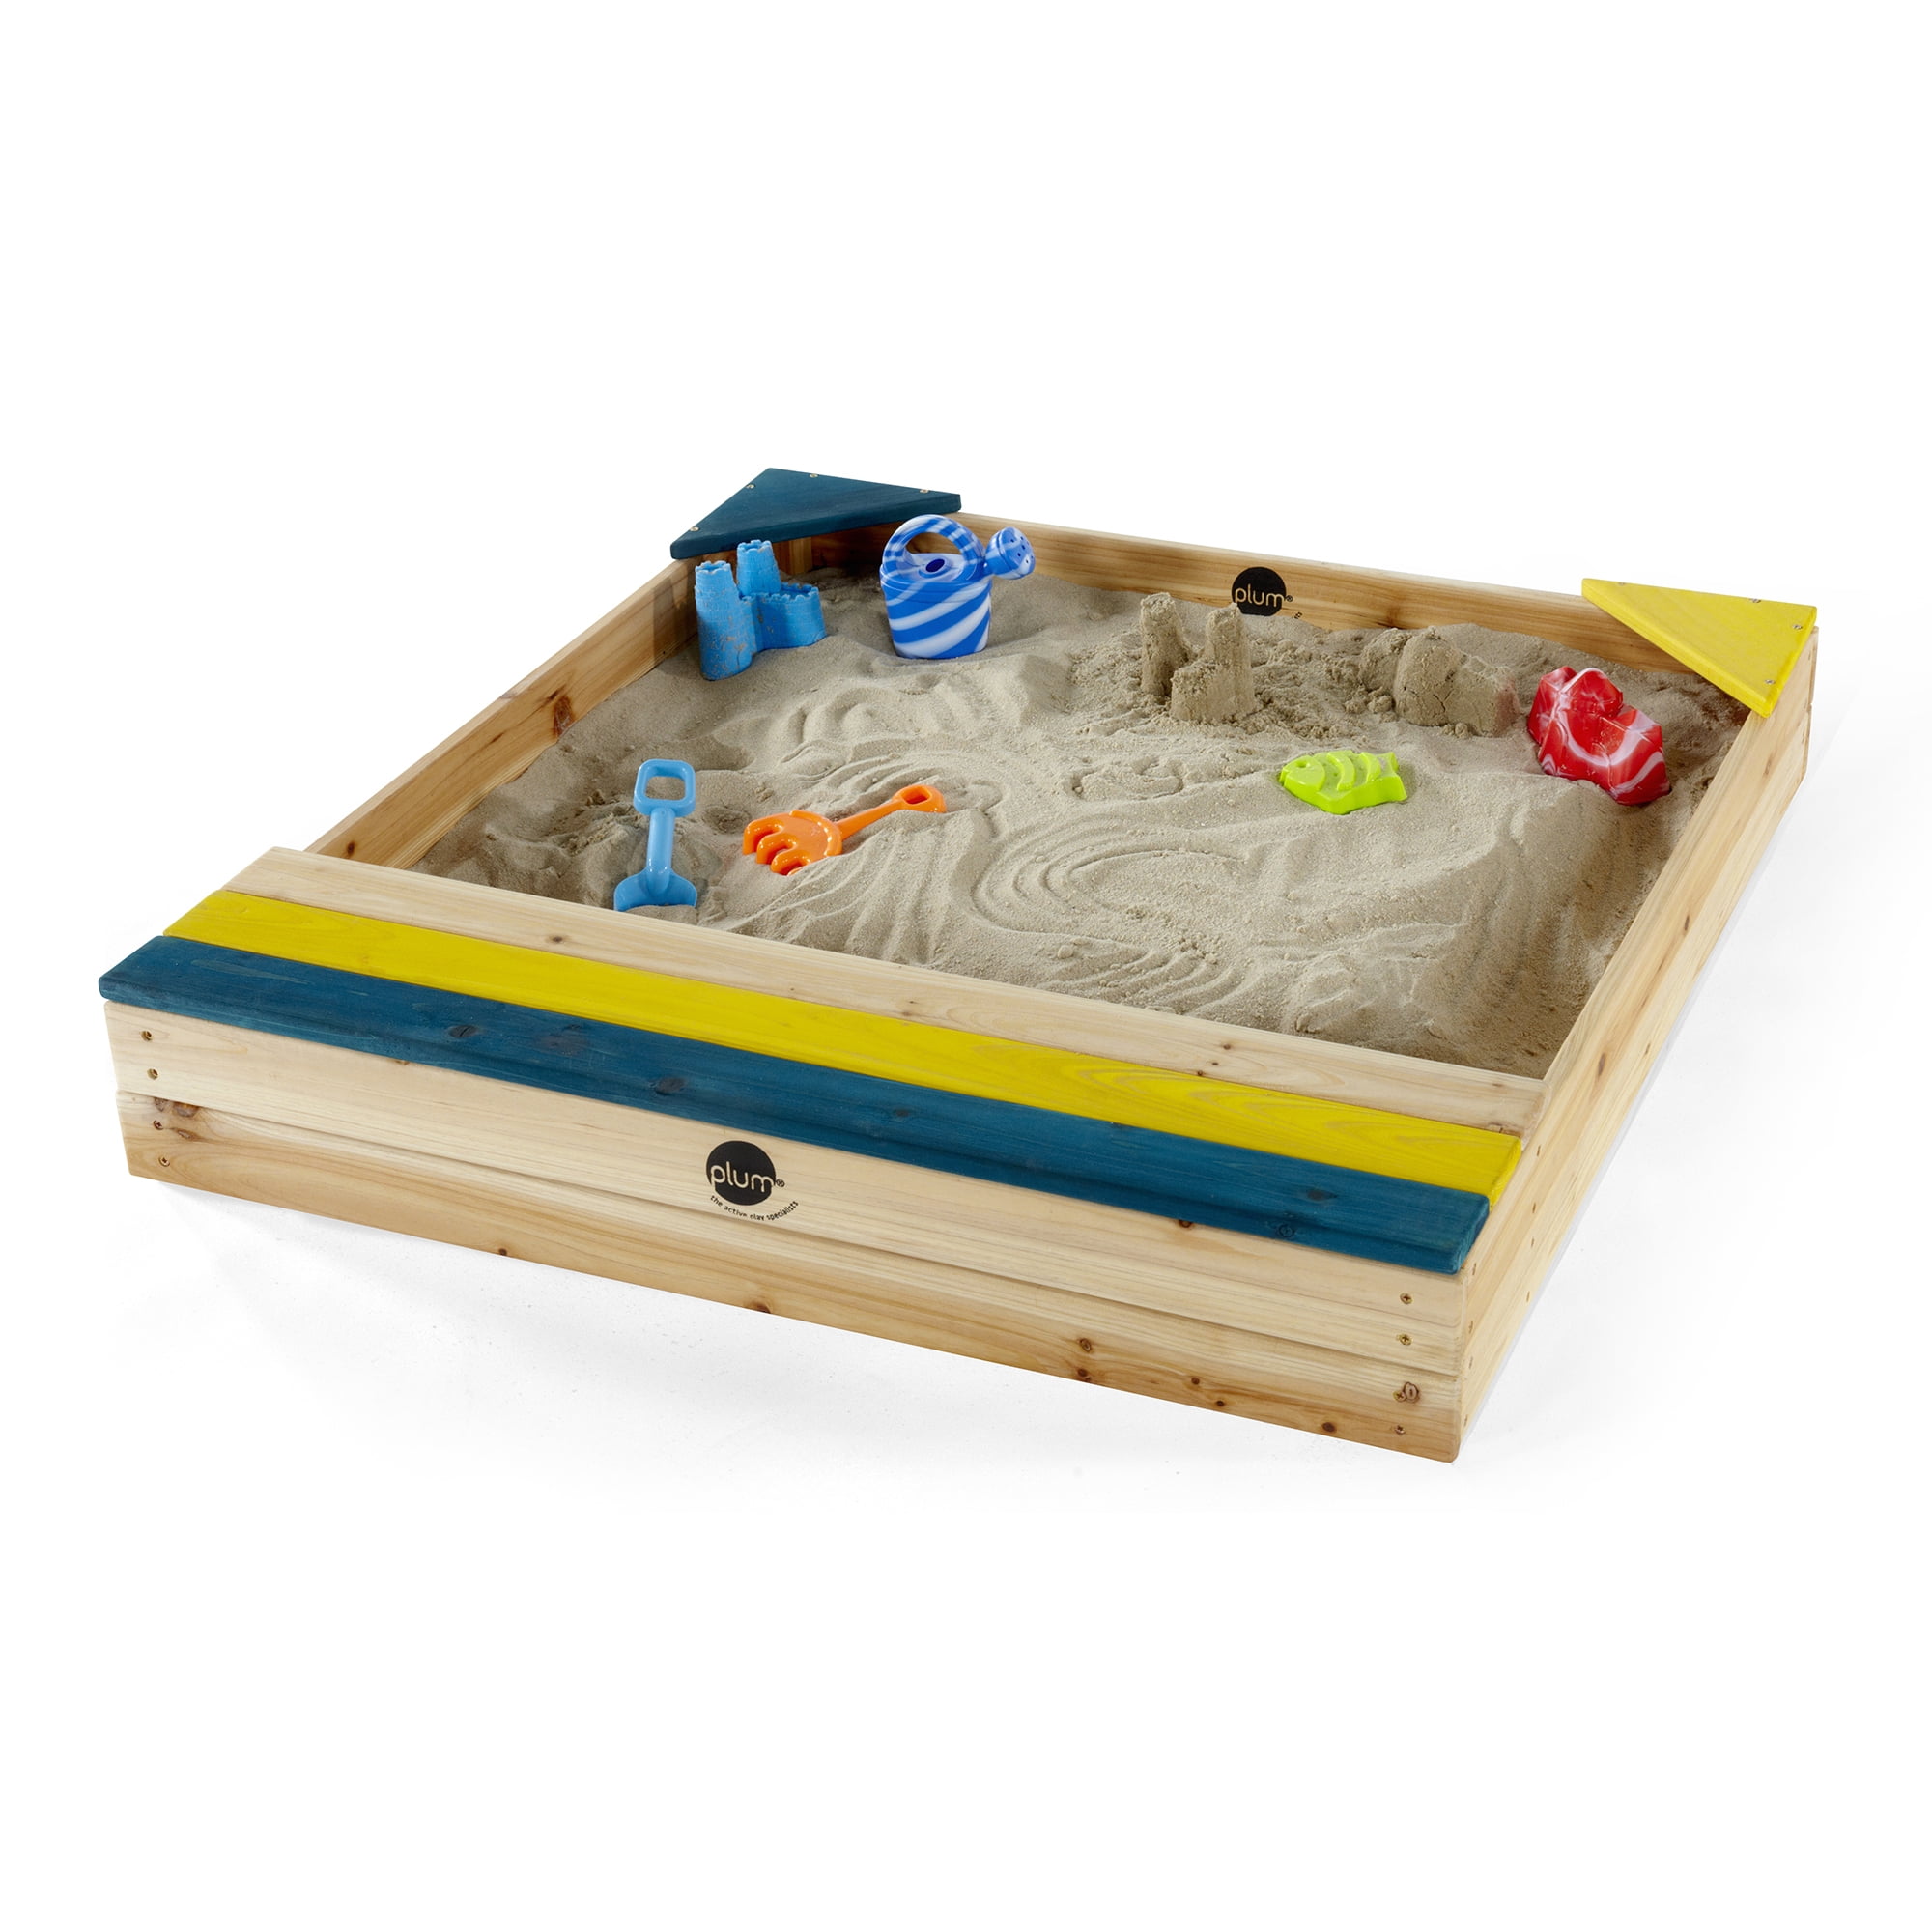 Wooden Sandbox Made of Weatherproof Solid Wood Grey Glazed 2 Plastic Play Trays and 4 Removable seat Plates Included. Roba Outdoor Sandpit with Play tub